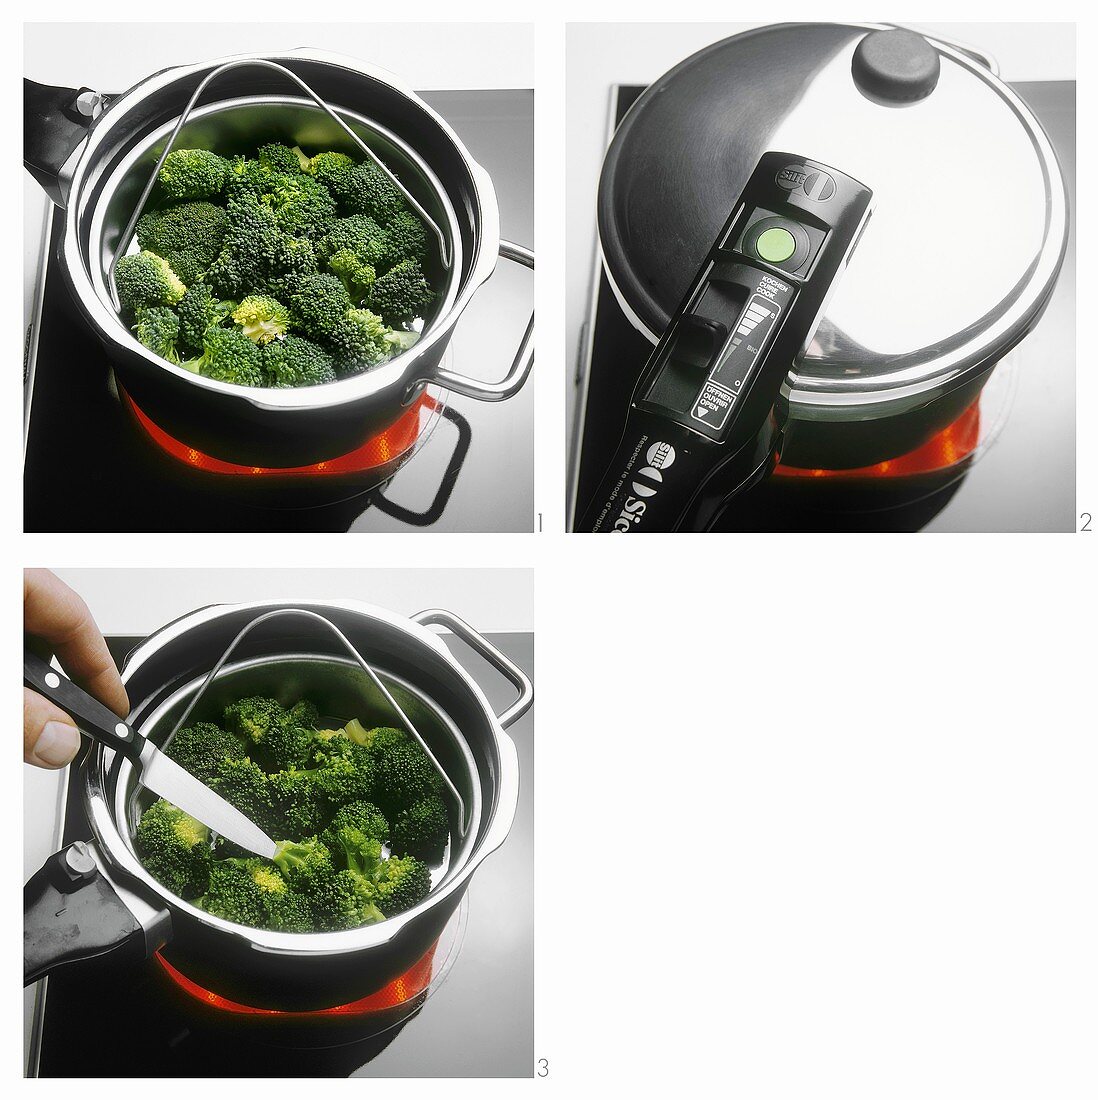 Steaming broccoli in pan